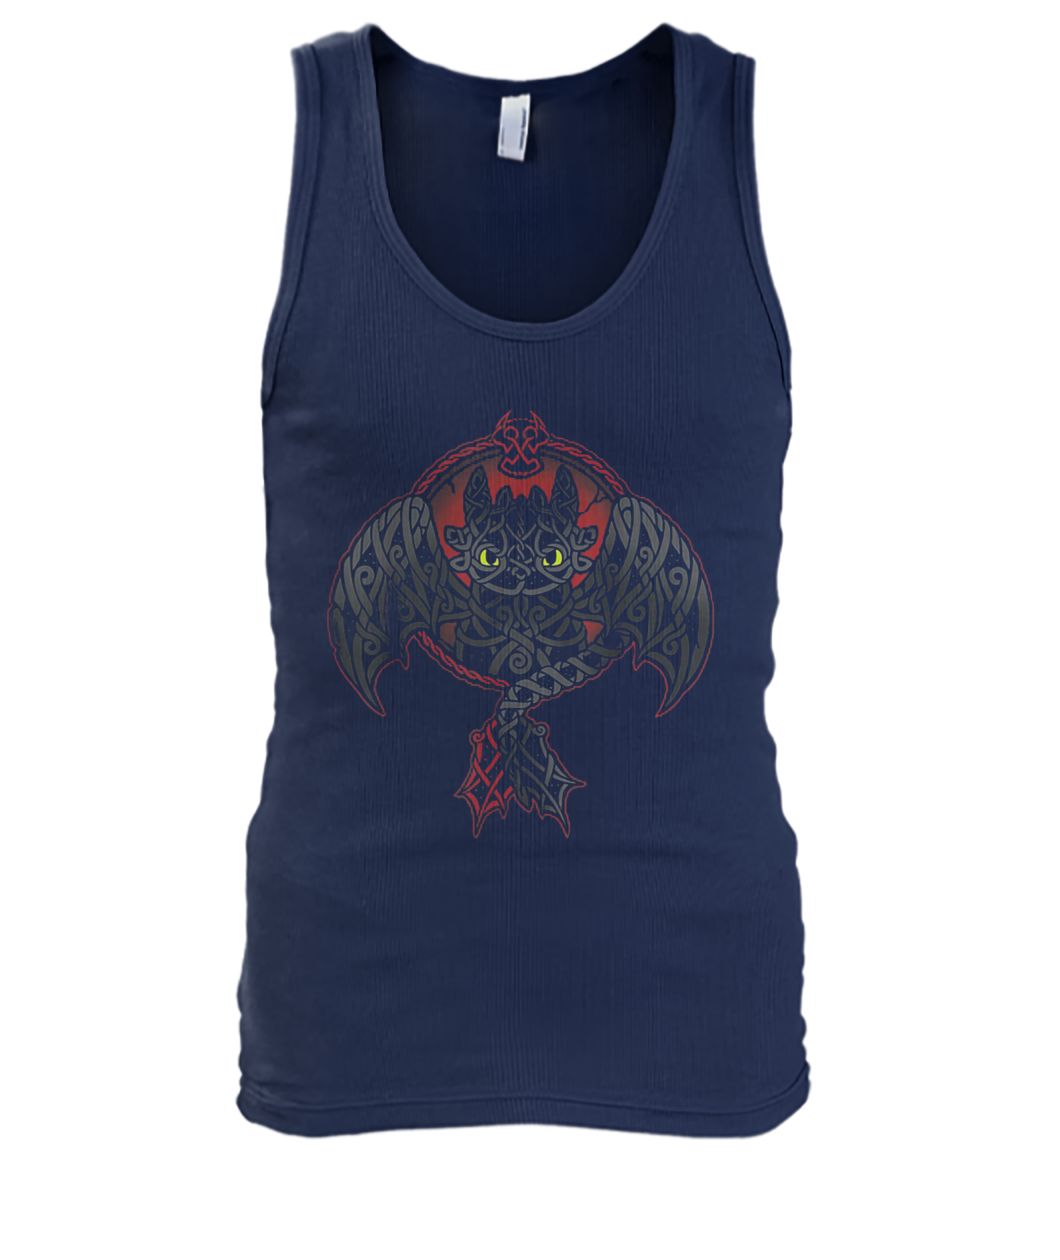 How to train your dragon viking toothless night fury men's tank top